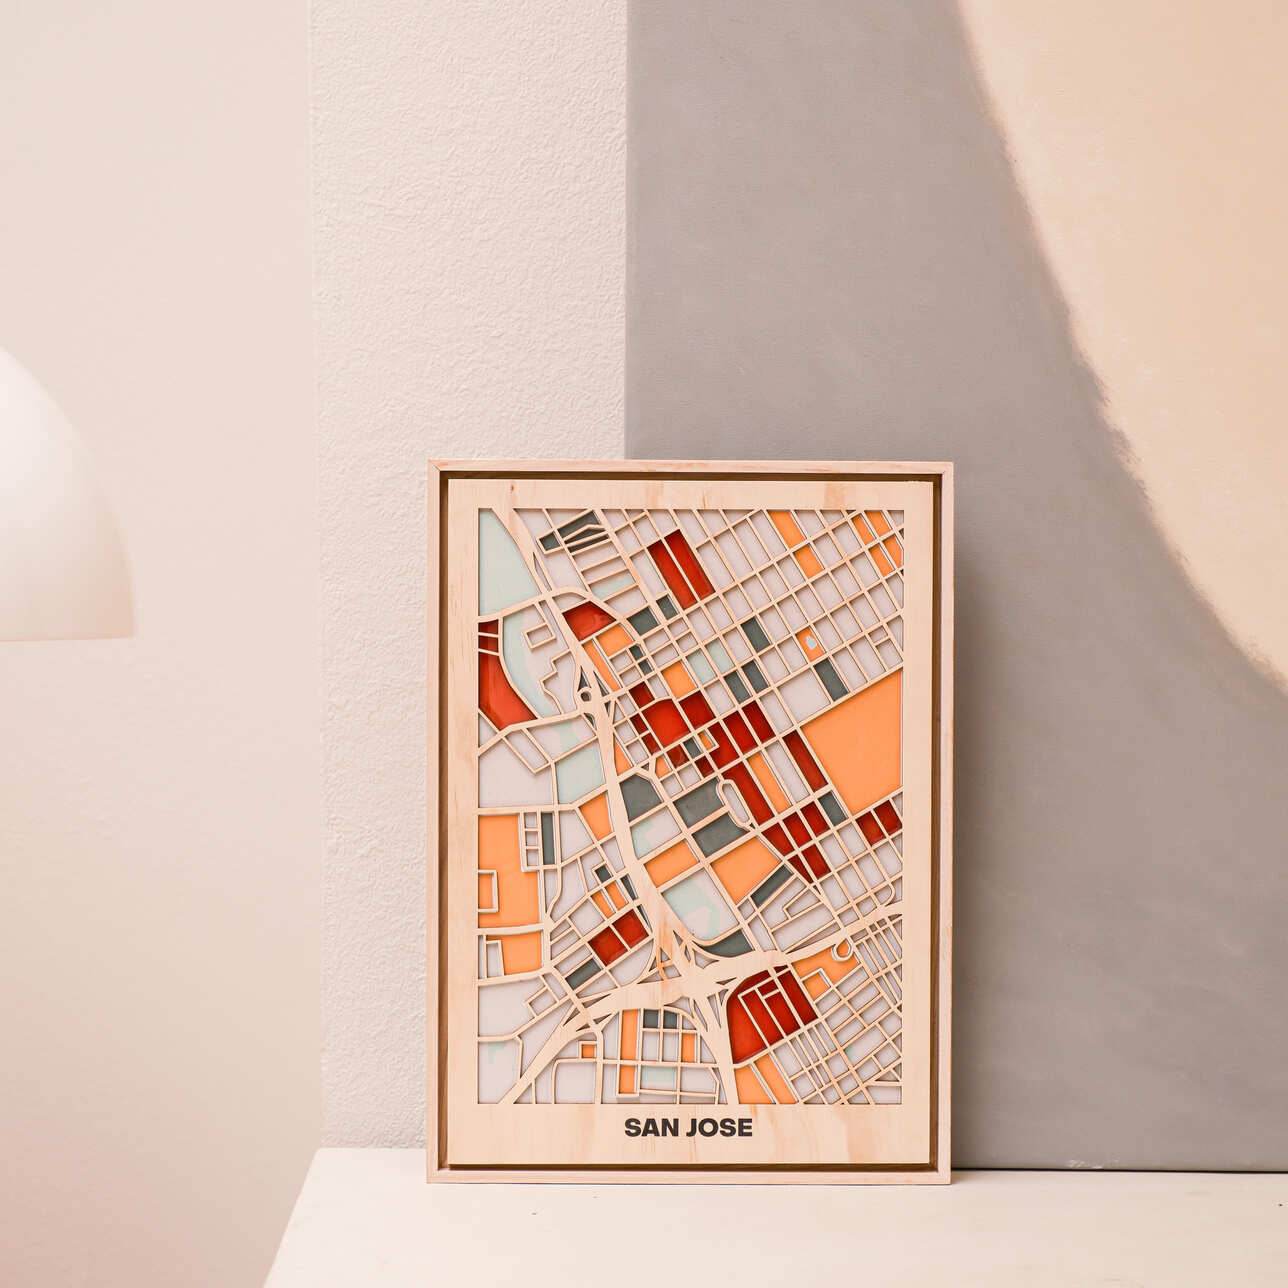 Wooden City Maps of American Cities